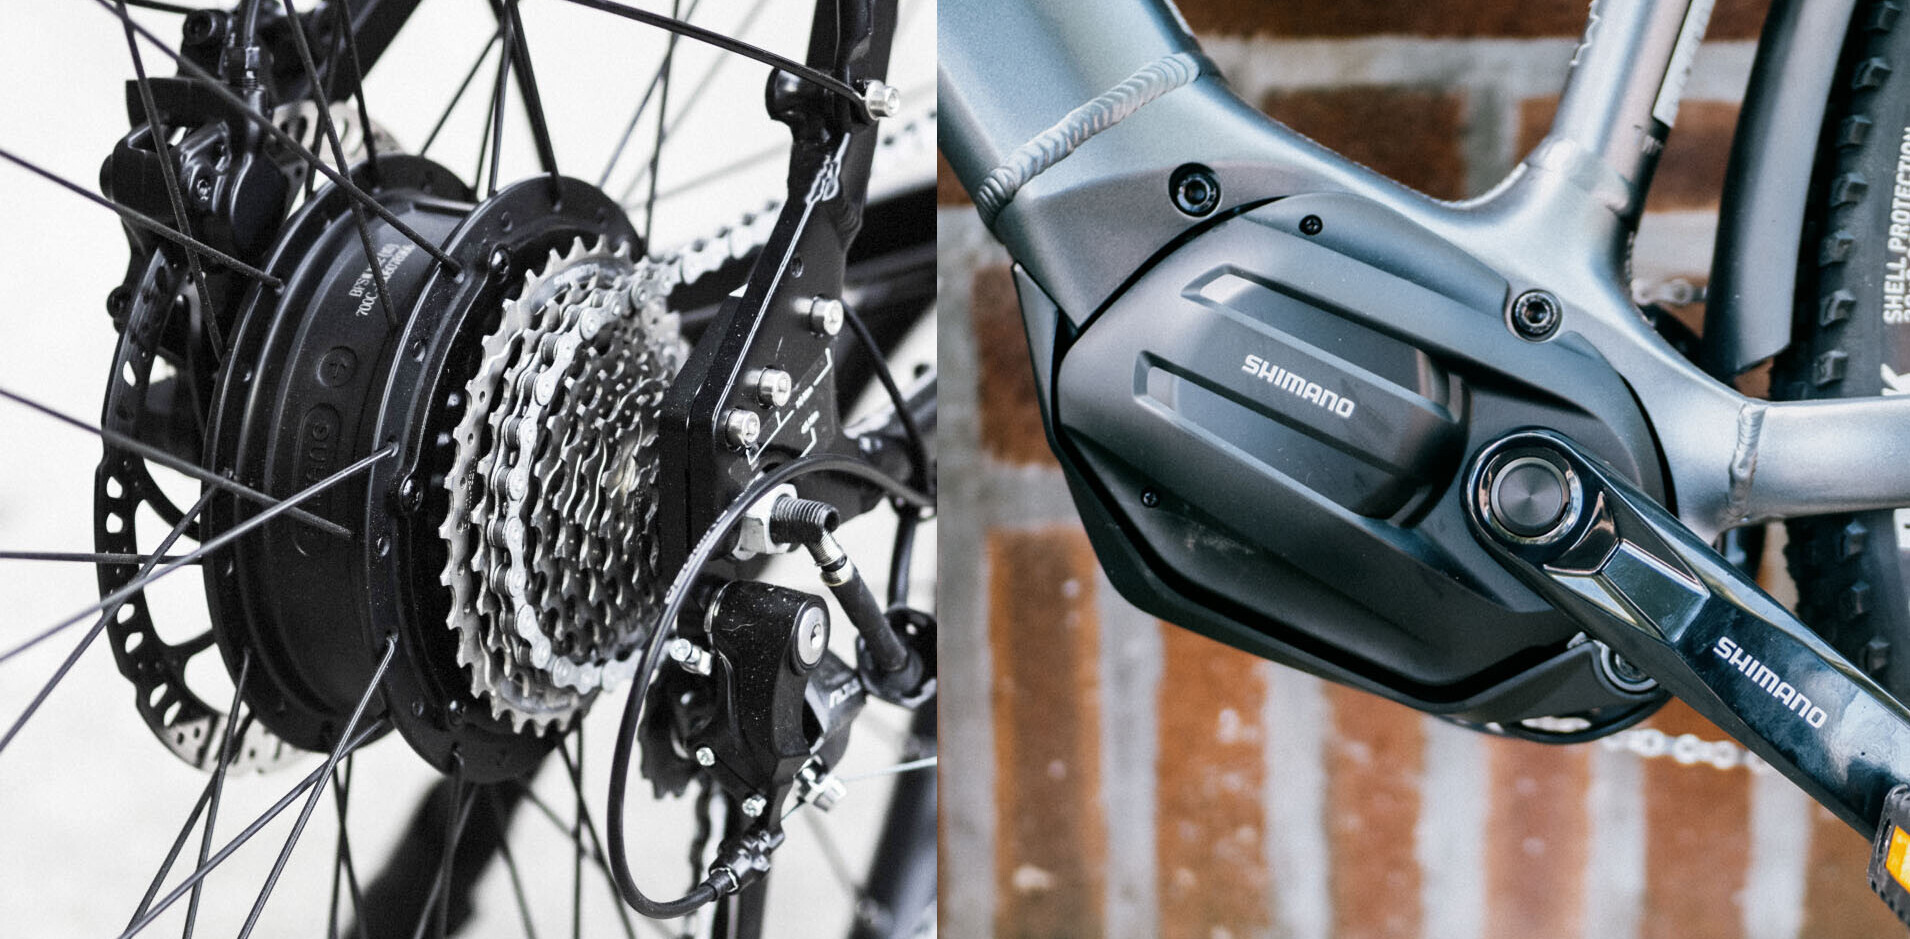 Hub motor vs mid-drive: Which type of ebike is best for you?